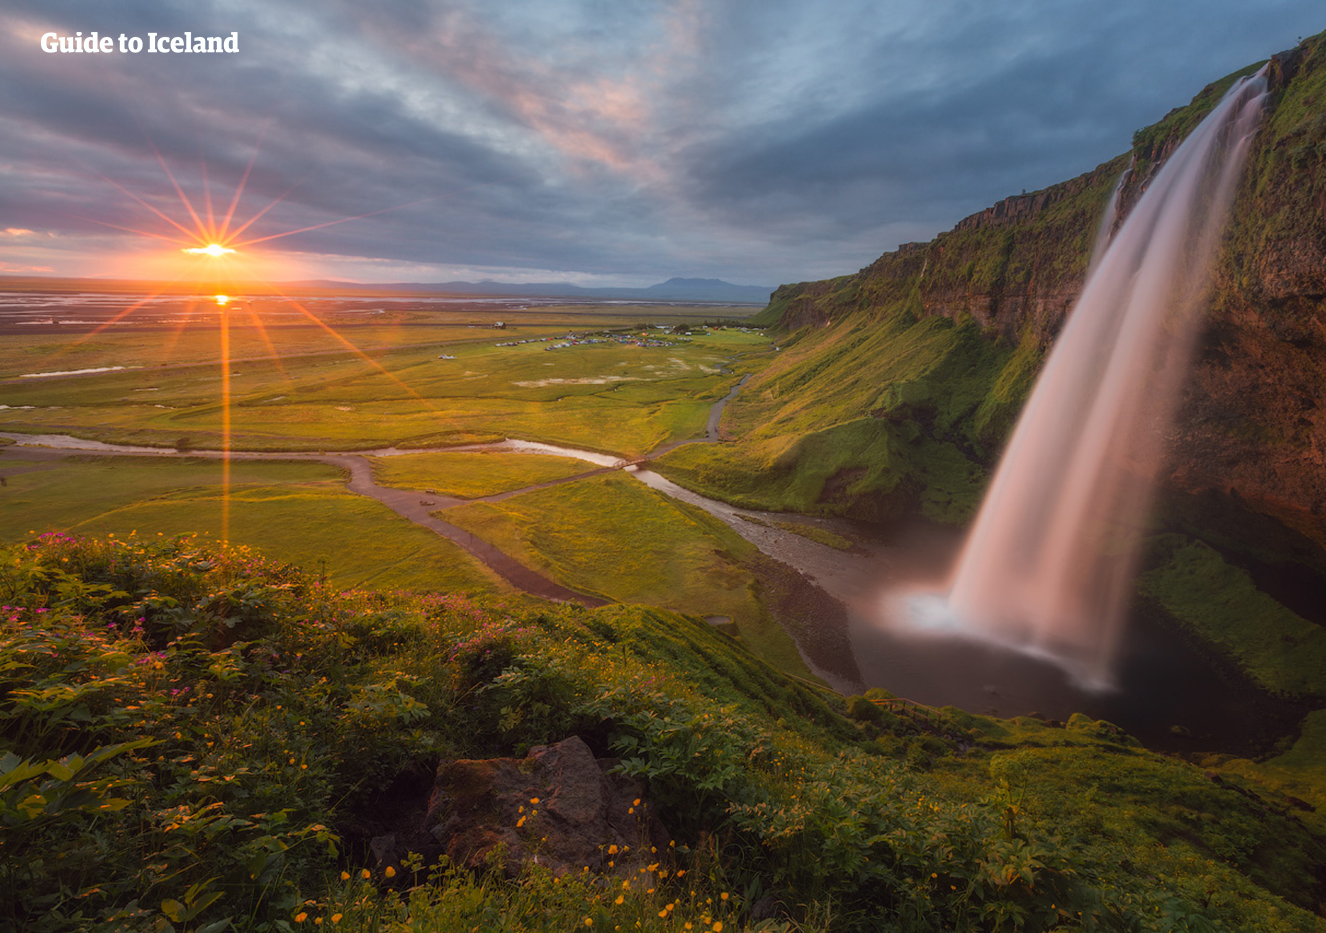 From the cave behind Seljalandsfoss waterfall in south Iceland, visitors can admire the midnight sun through a veil of water.